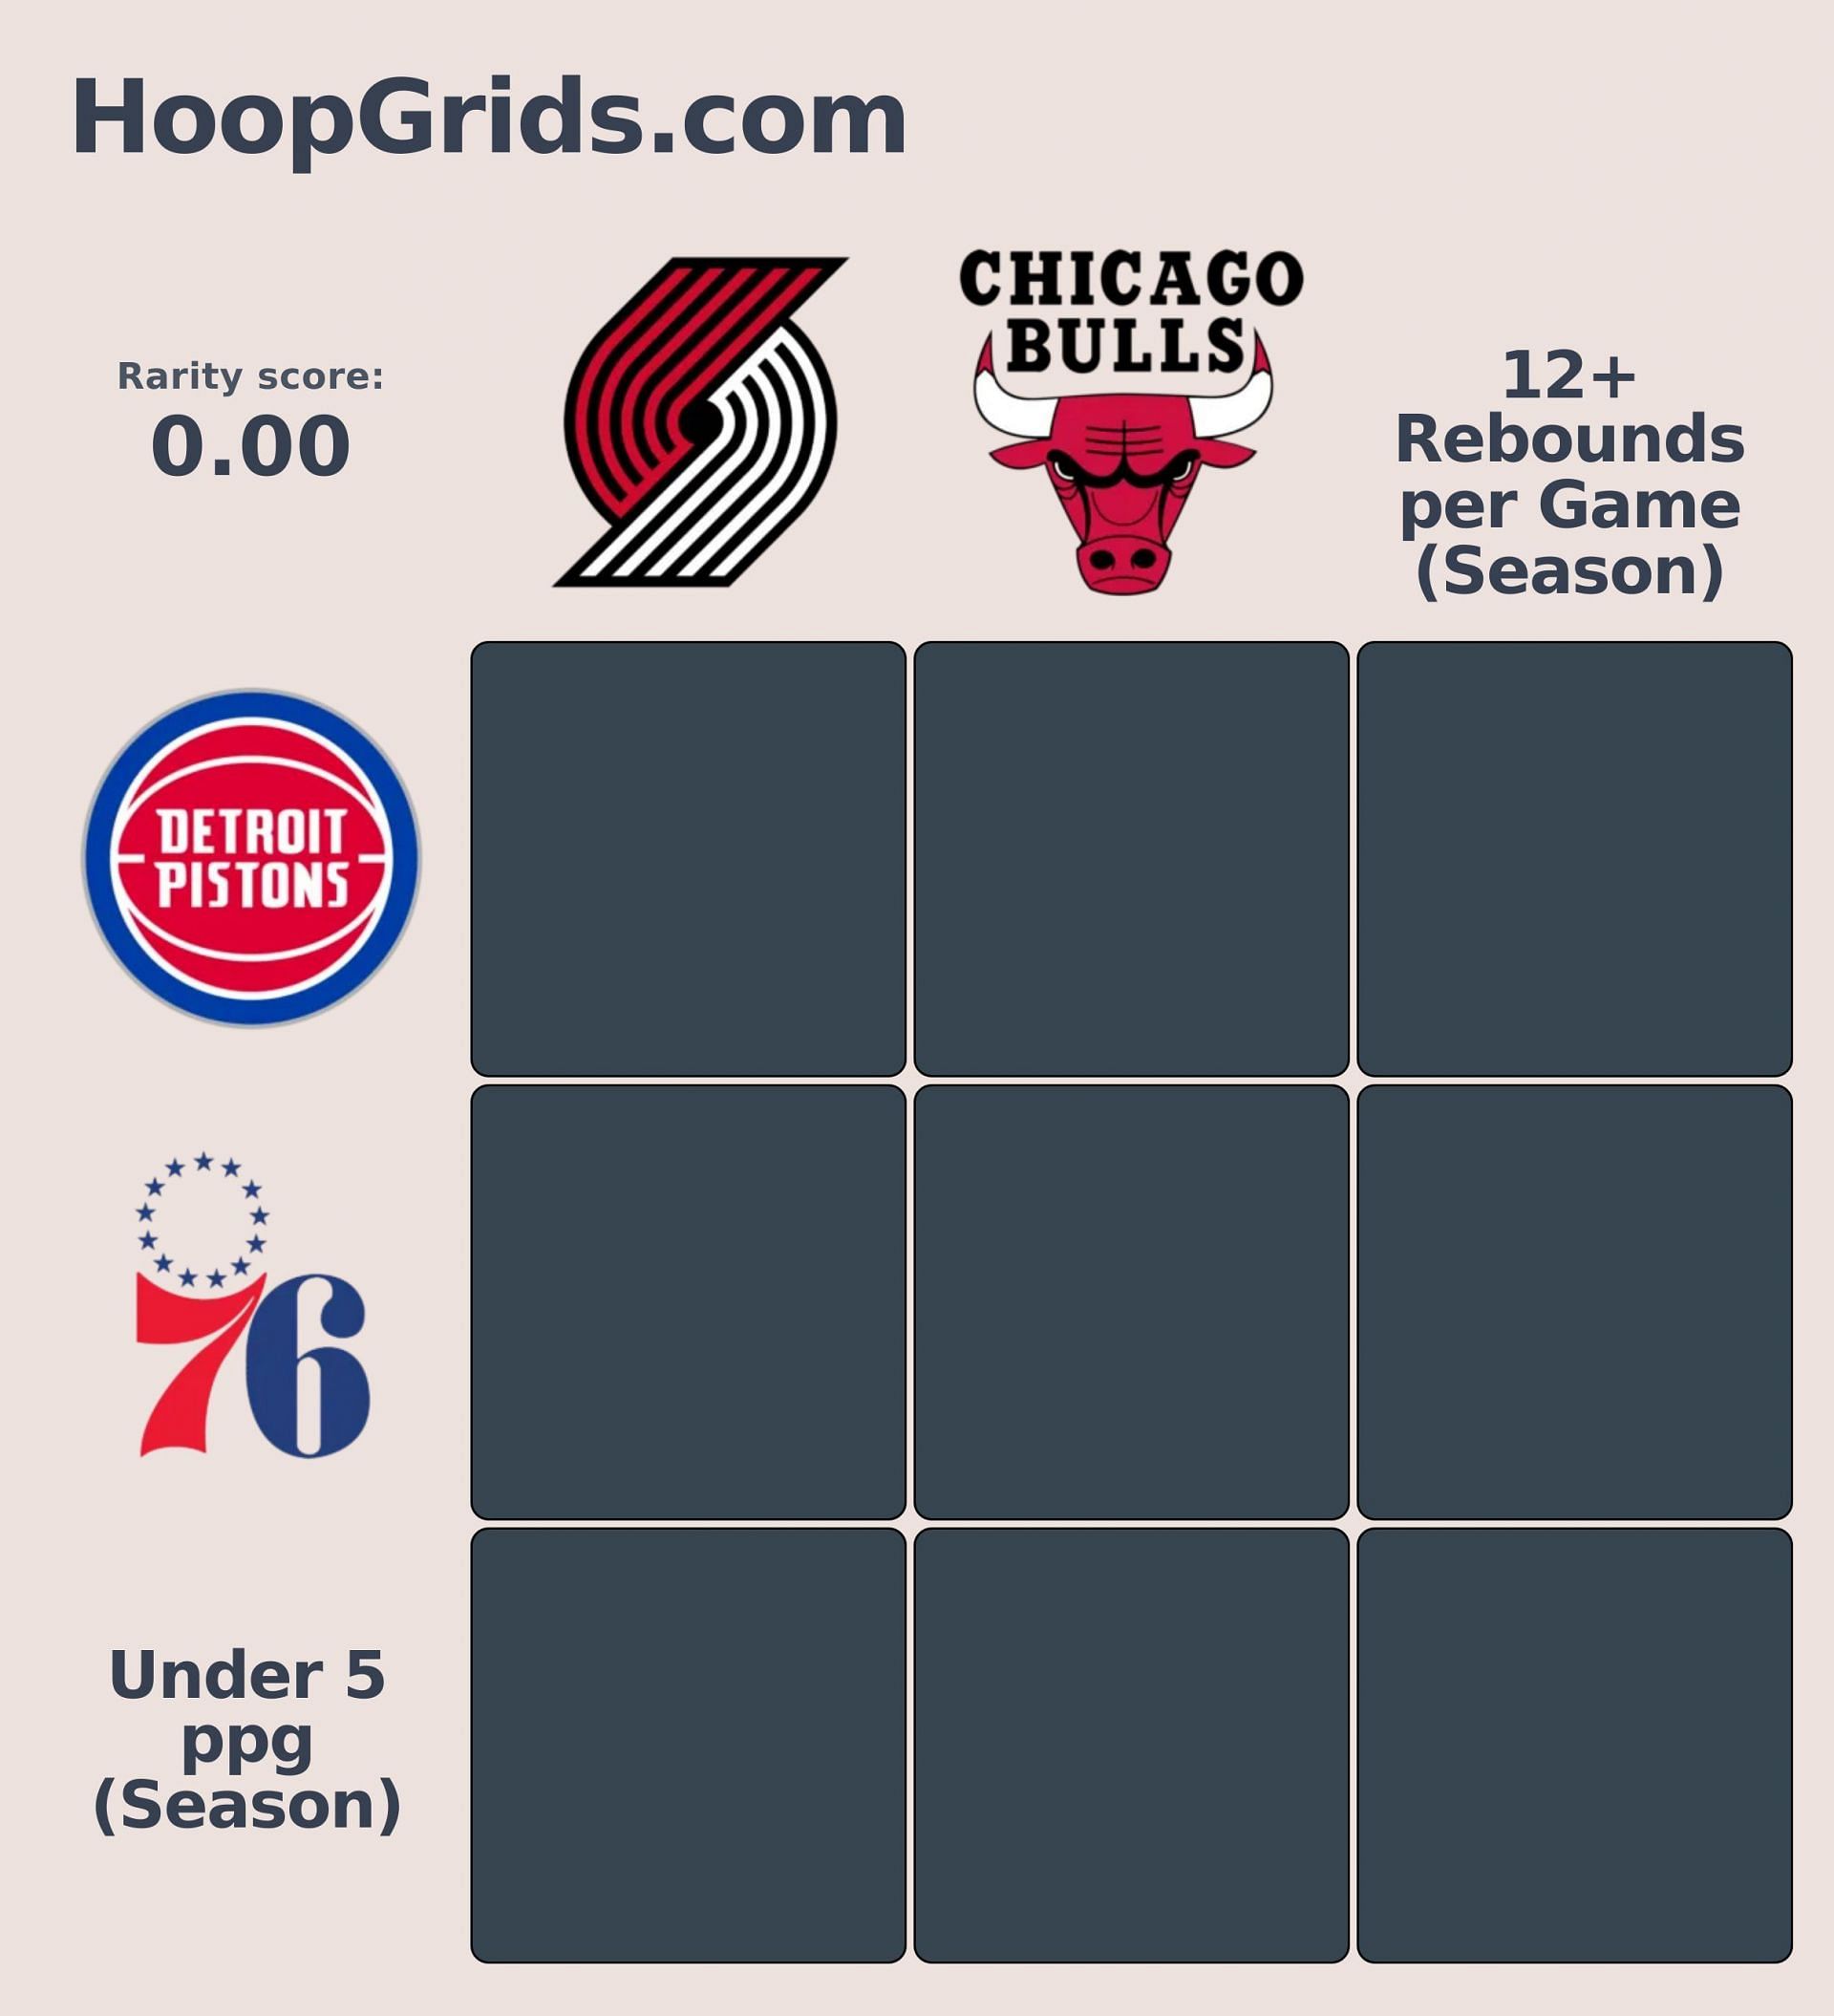 The latest edition of the NBA Hoop Grids has dropped.